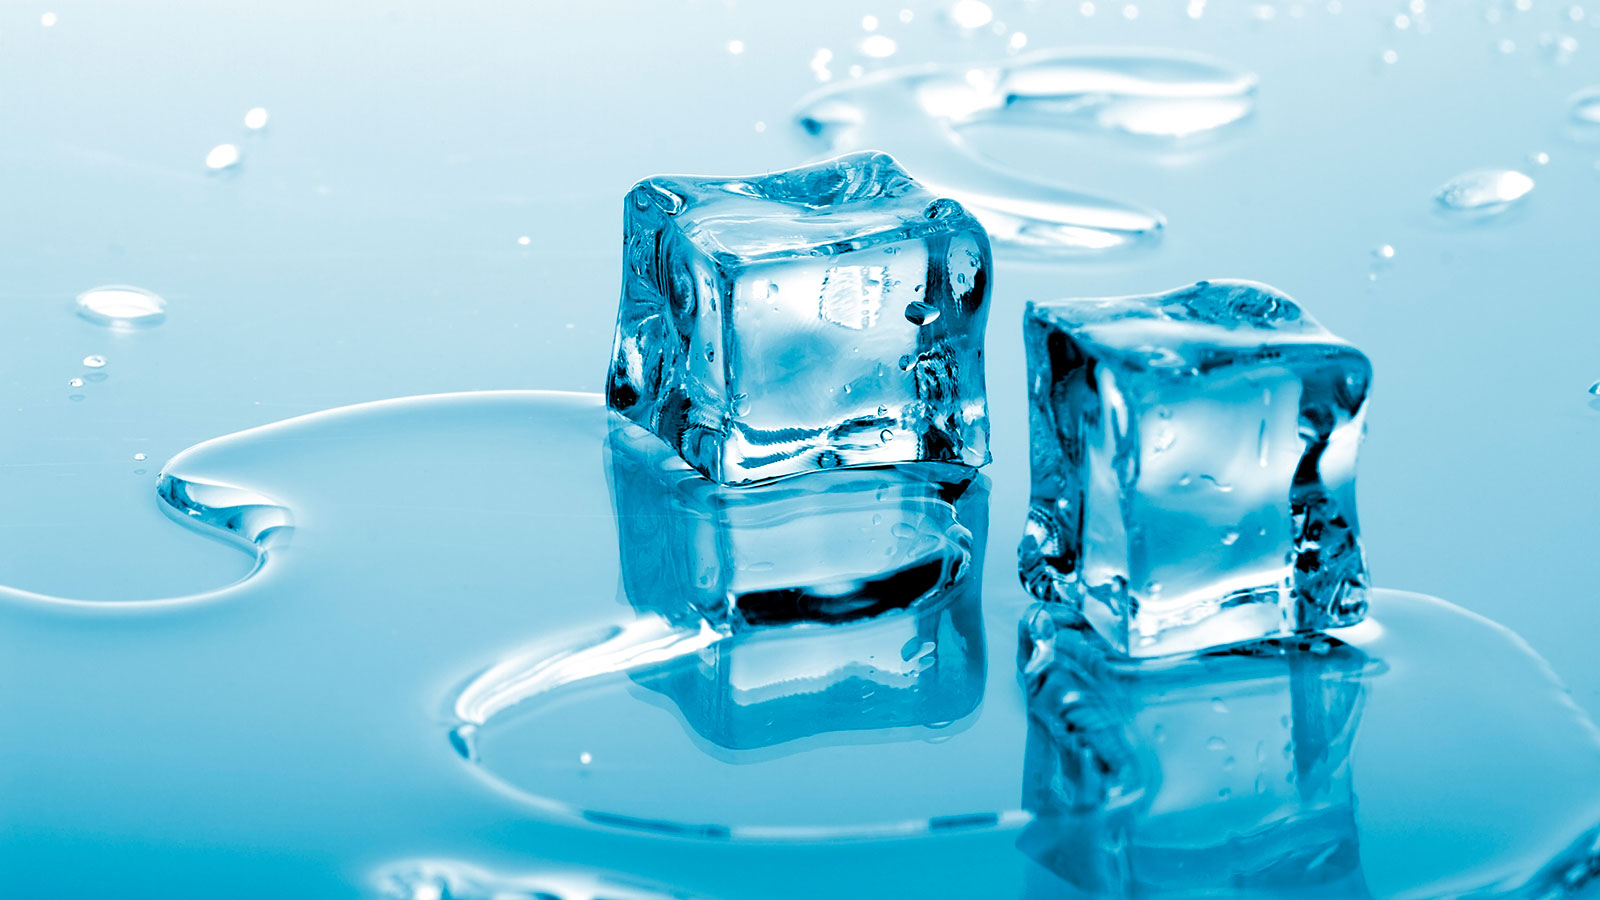 Two ice cubes in the process of phase changing from solid to liquid